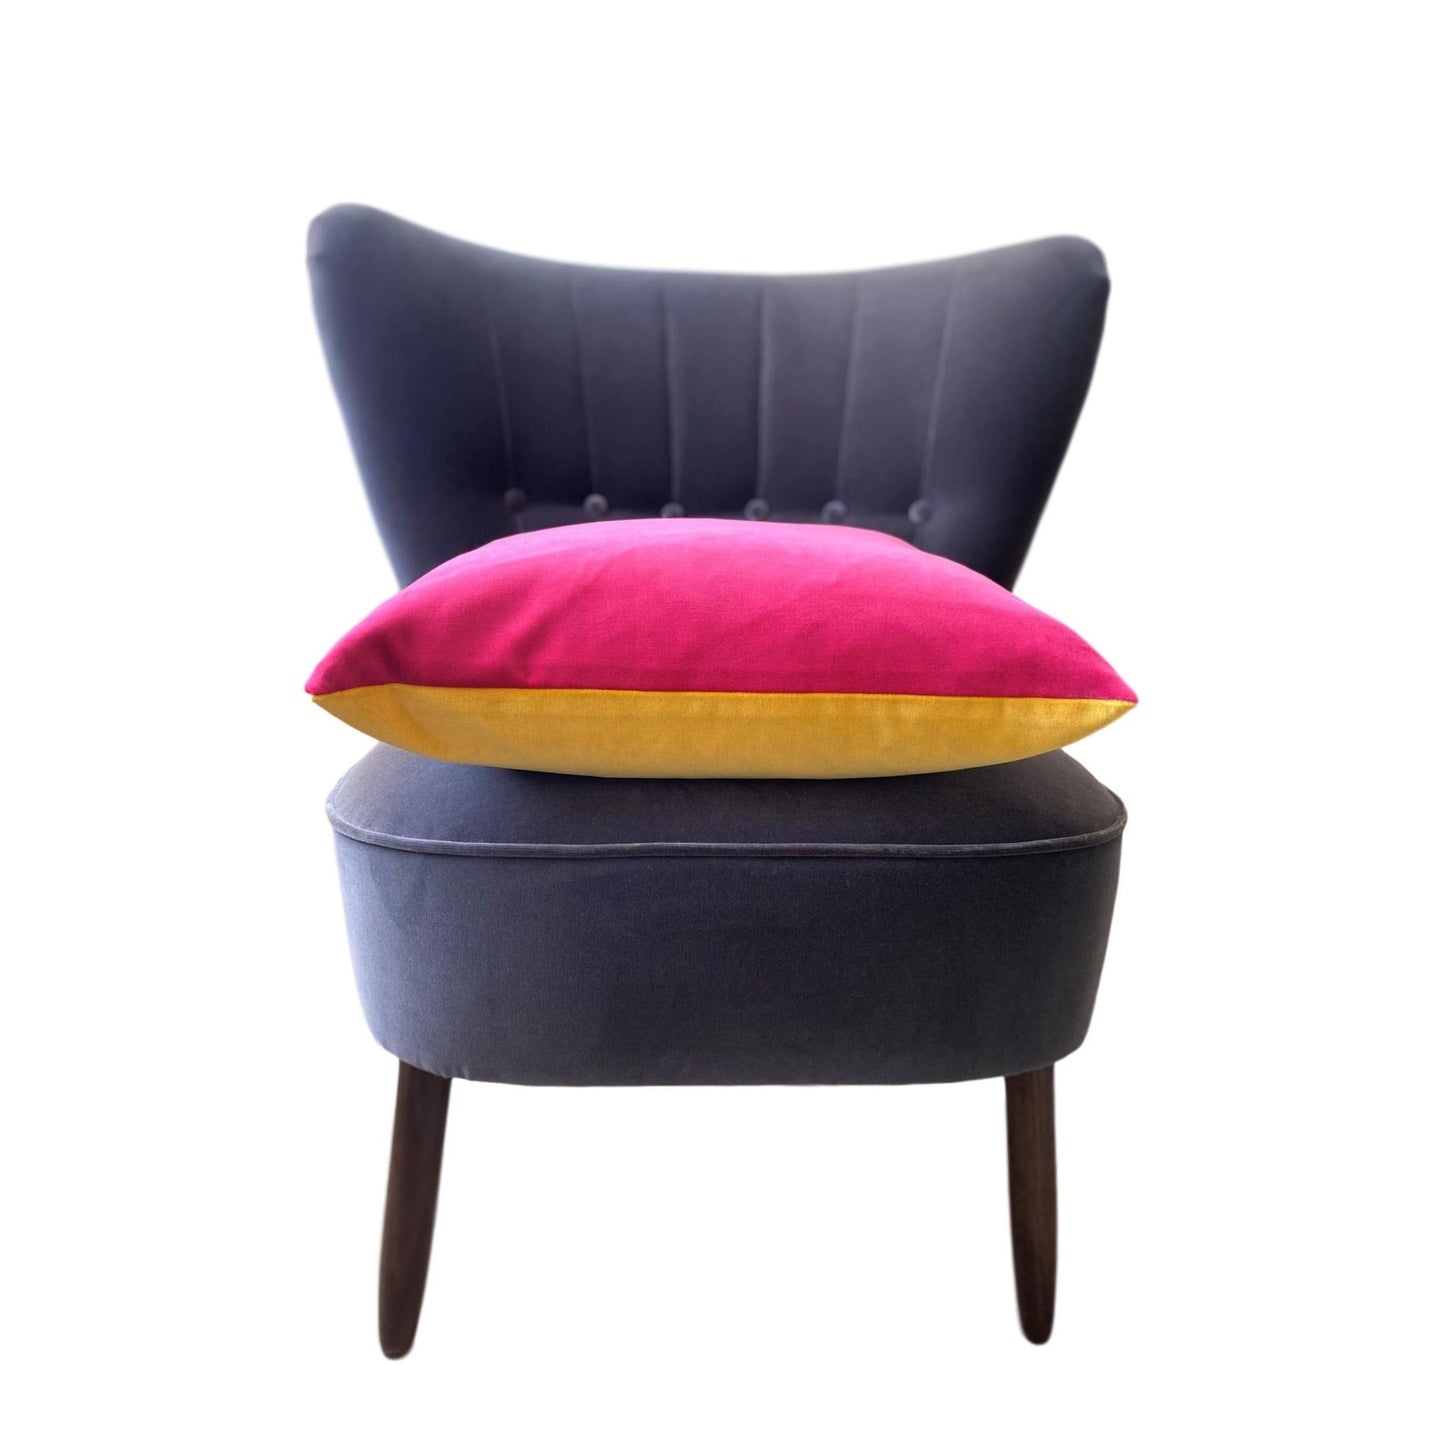 Bright Pink Velvet Cushion Cover with Mustard Yellow-Luxe 39